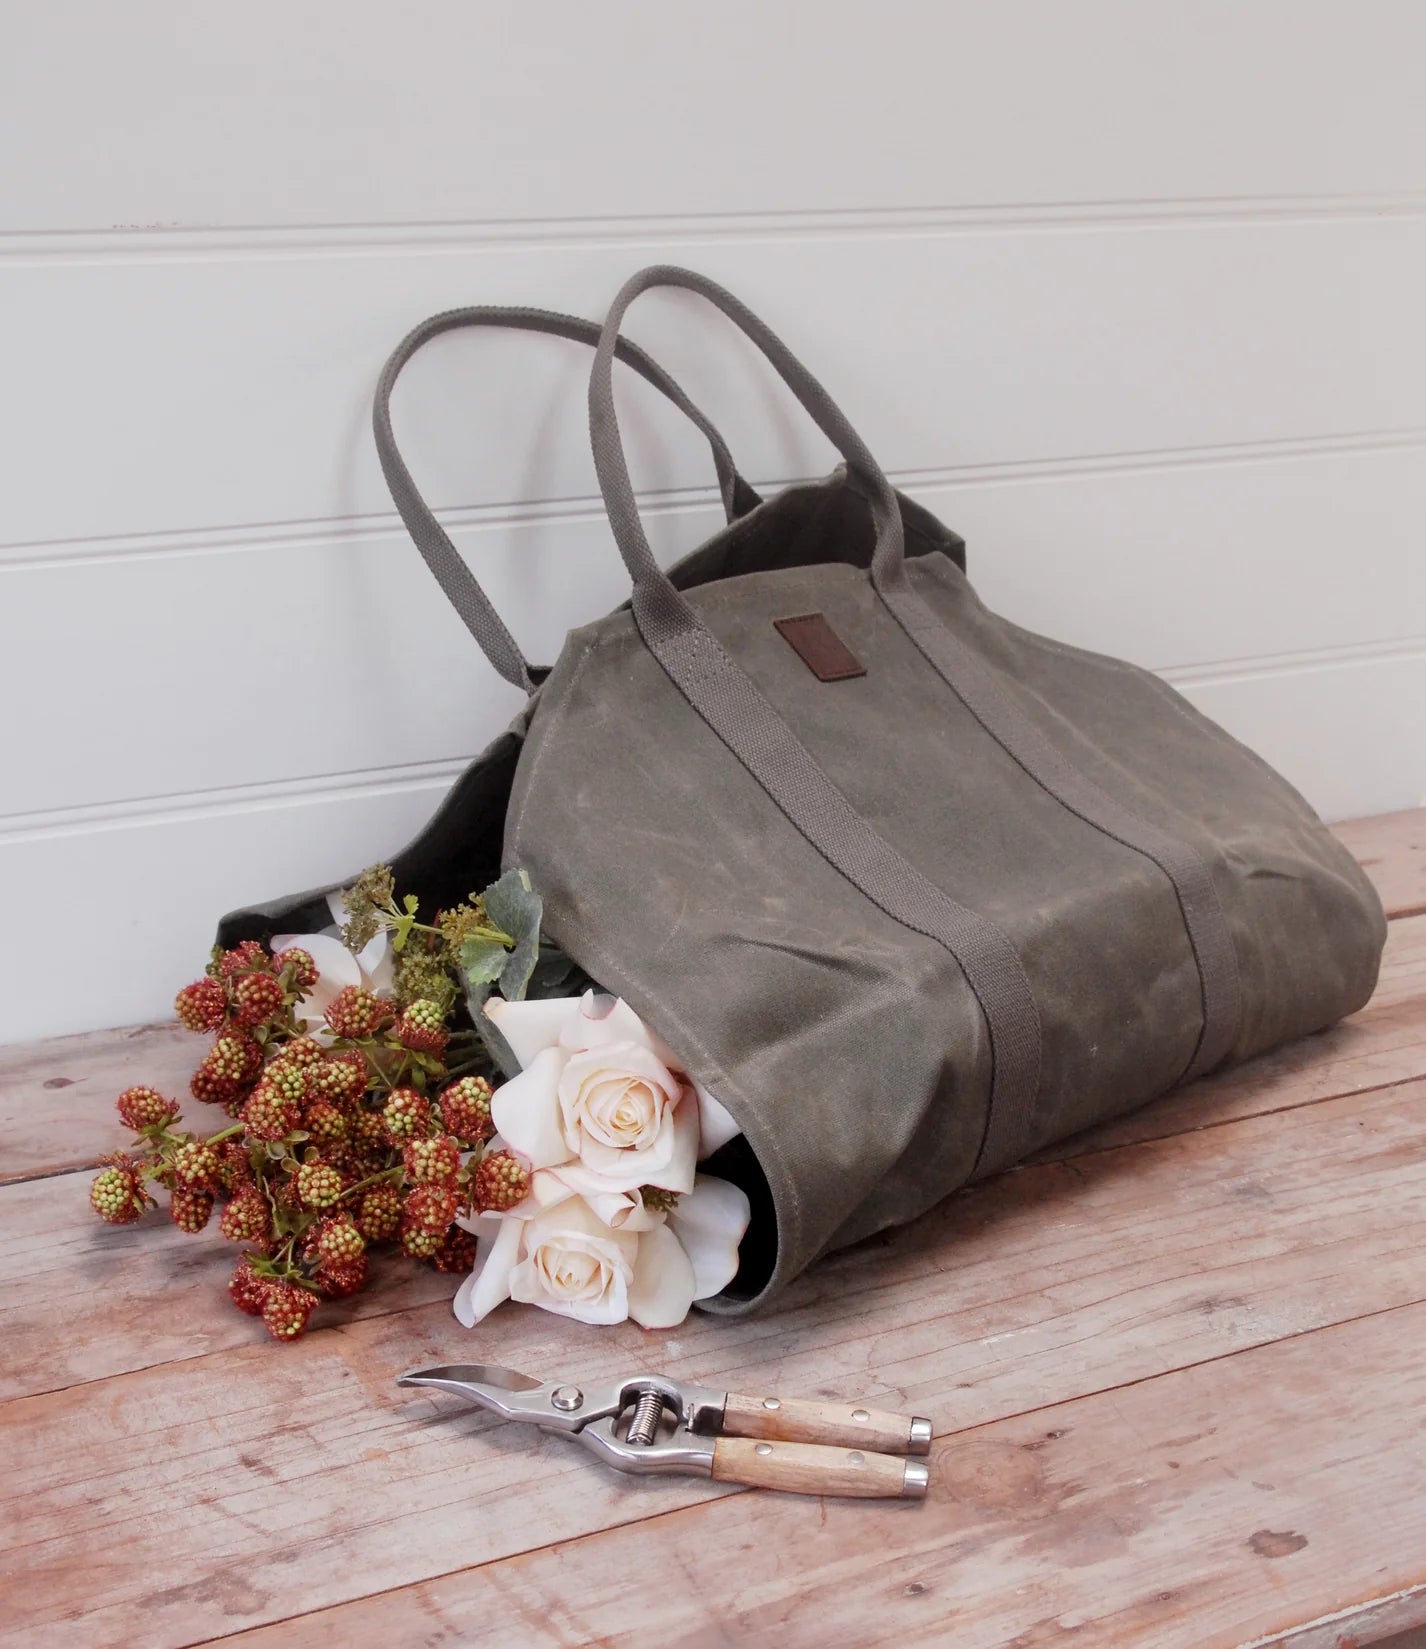 Waxed Canvas Log (or flower!) Carrier